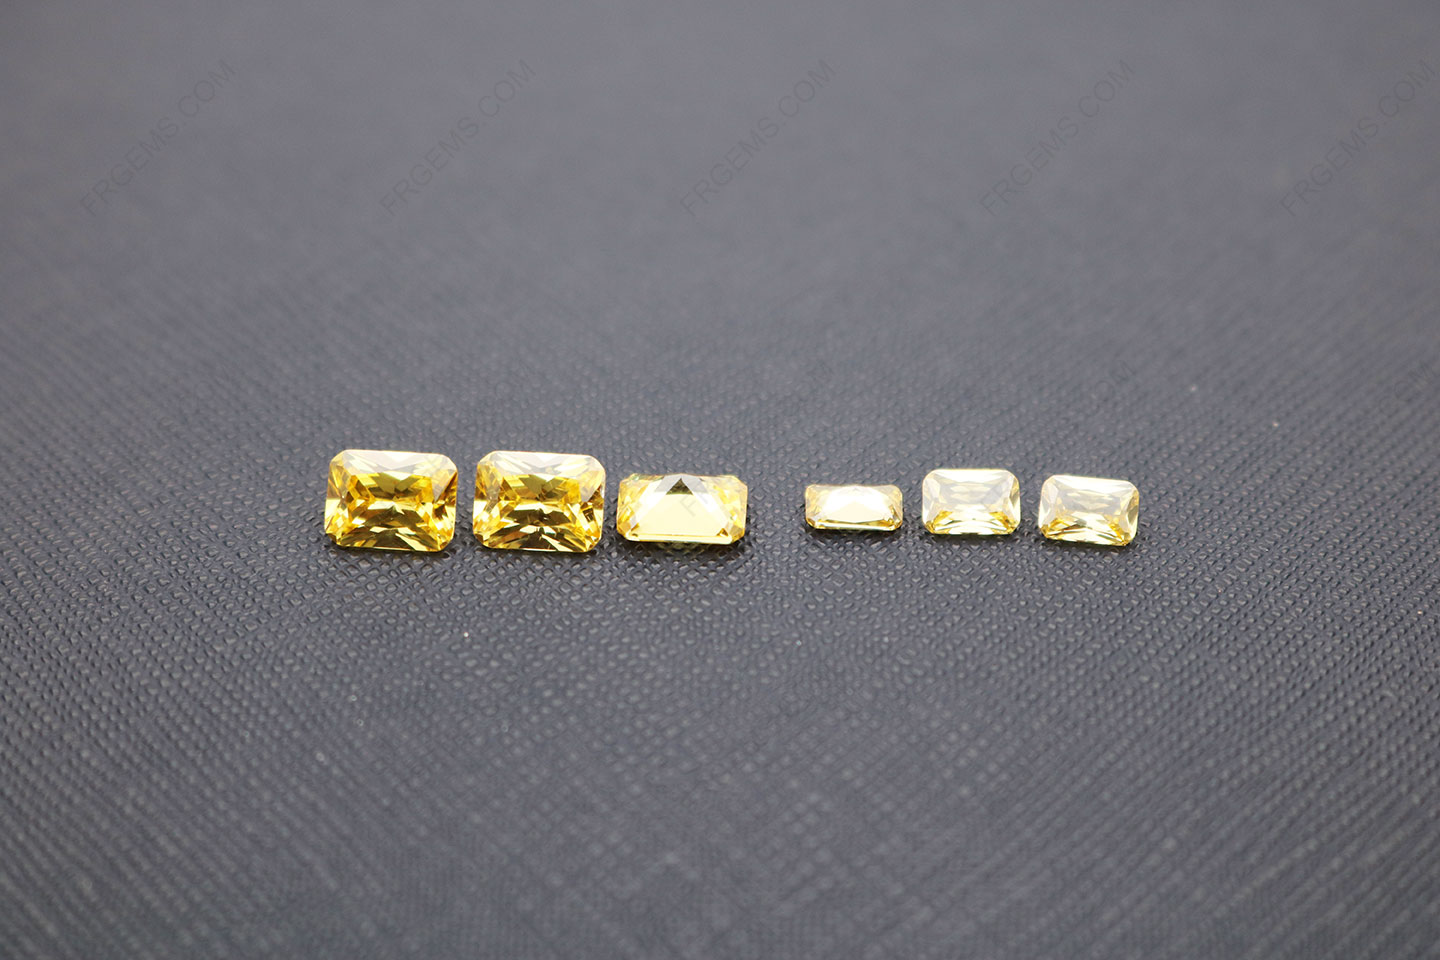 Cubic zirconia golden yellow light color shade radiant cut 8x6mm and 6x4mm gemstones IMG_5353